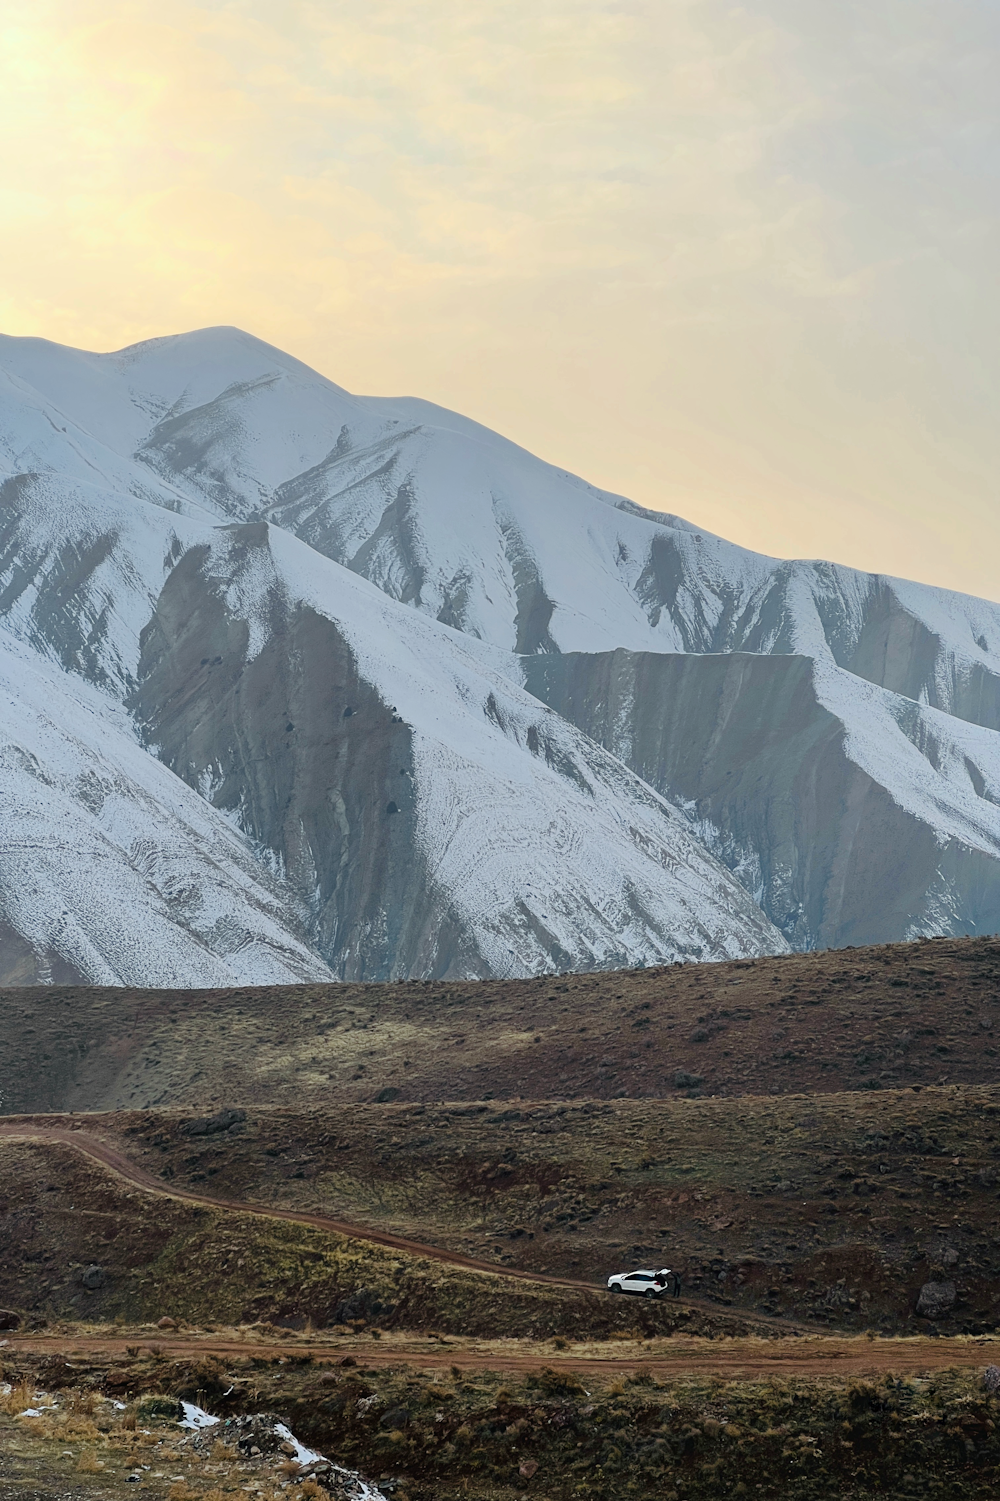 a snowy mountain range with a dirt road in the foreground